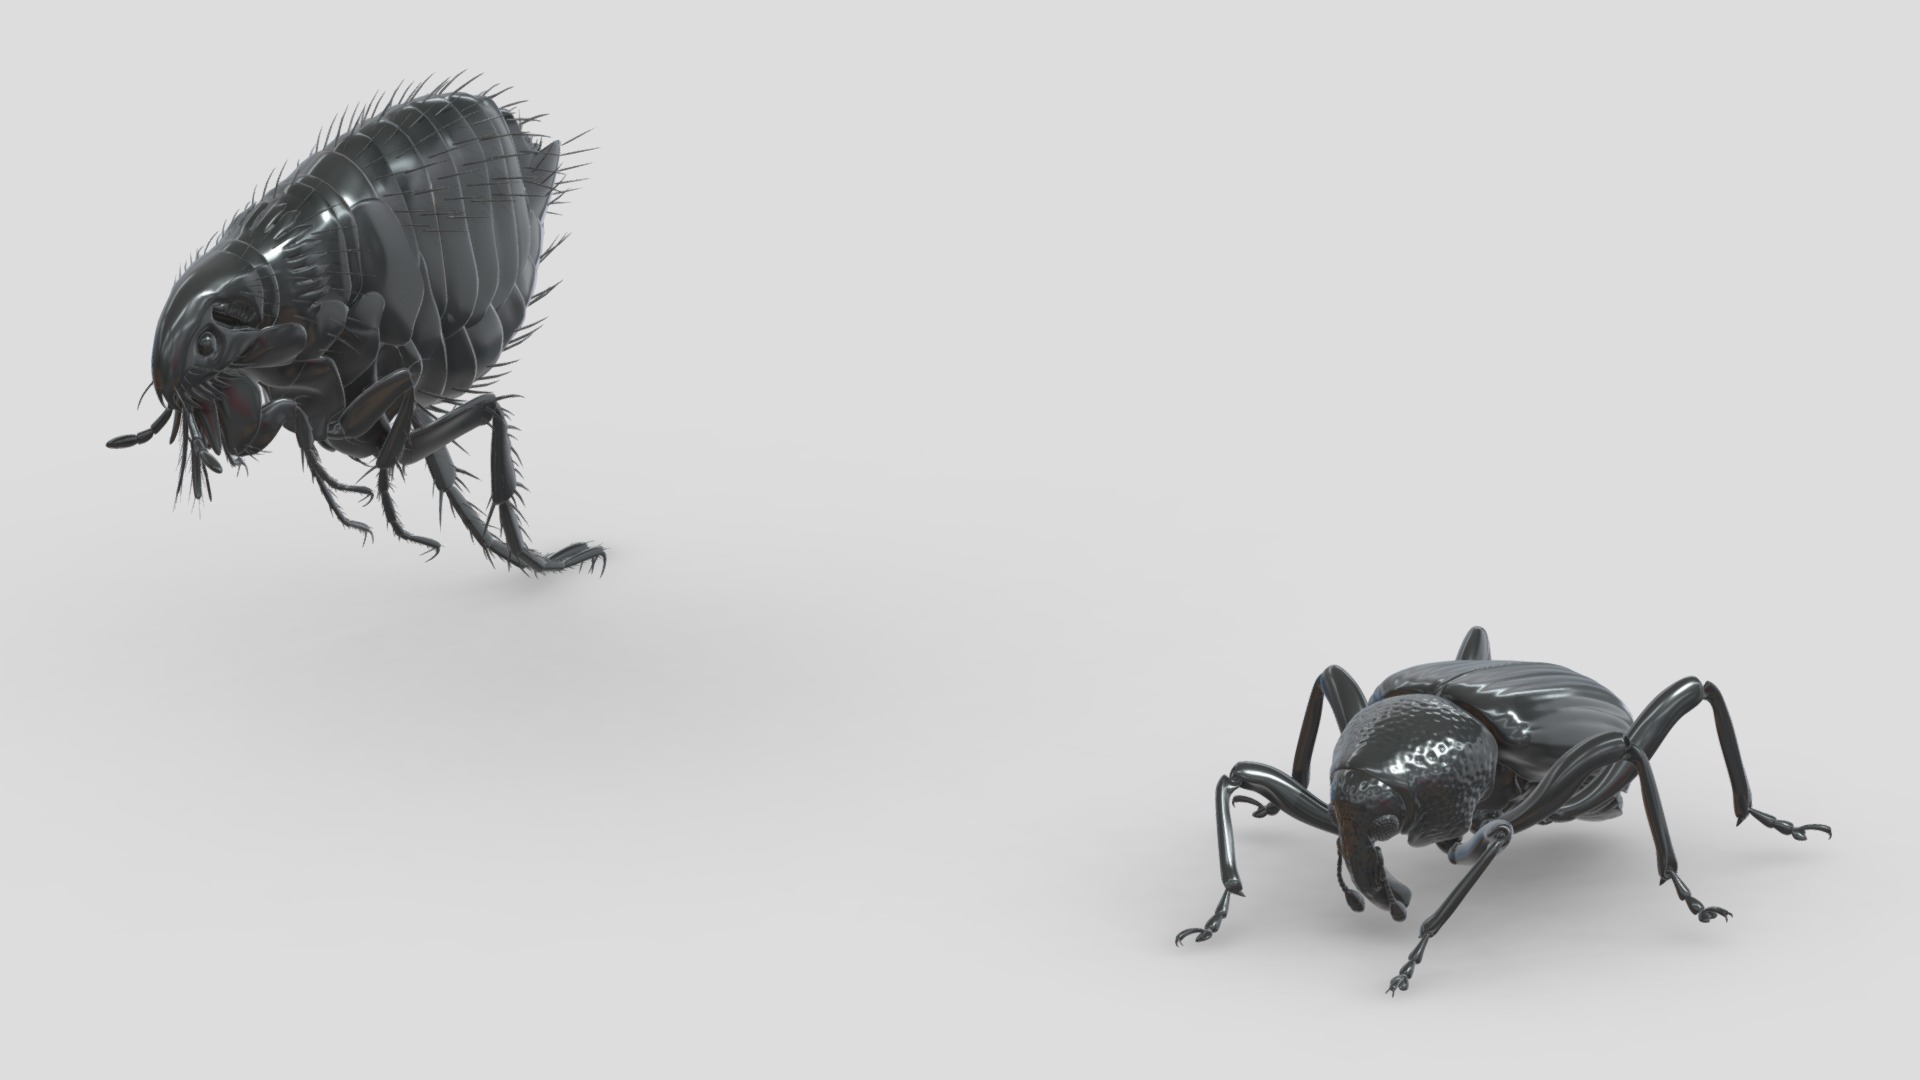 3D model Insects&beetles-pack12 - This is a 3D model of the Insects&beetles-pack12. The 3D model is about a group of black and white crabs.